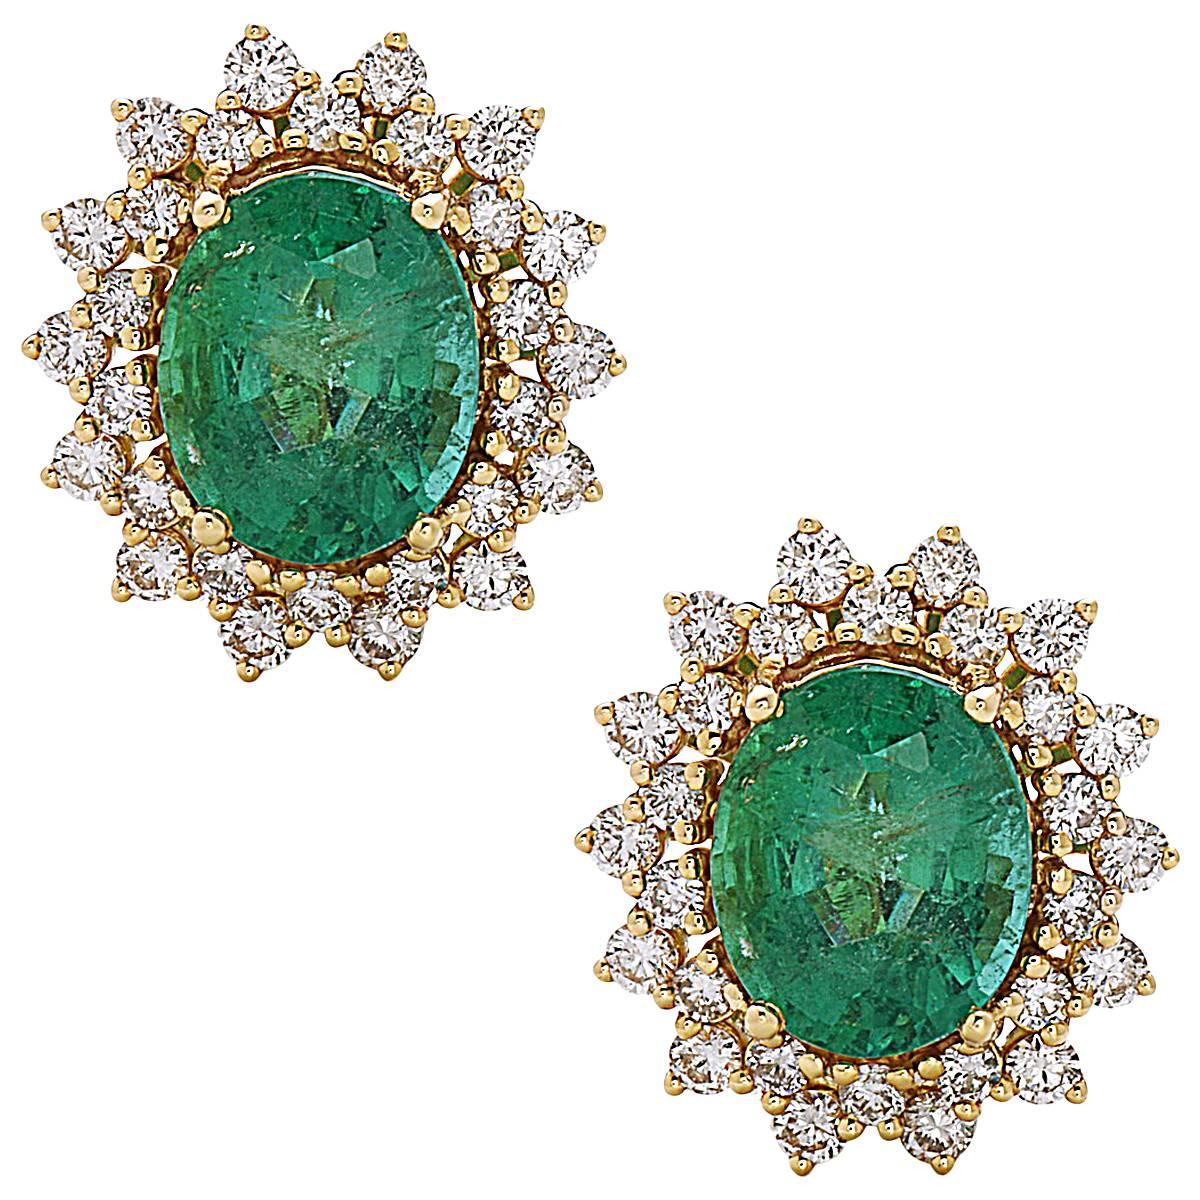 6.65ct Oval Shaped Zambian Emerald Stud Earrings With Diamonds Made In 18k Gold